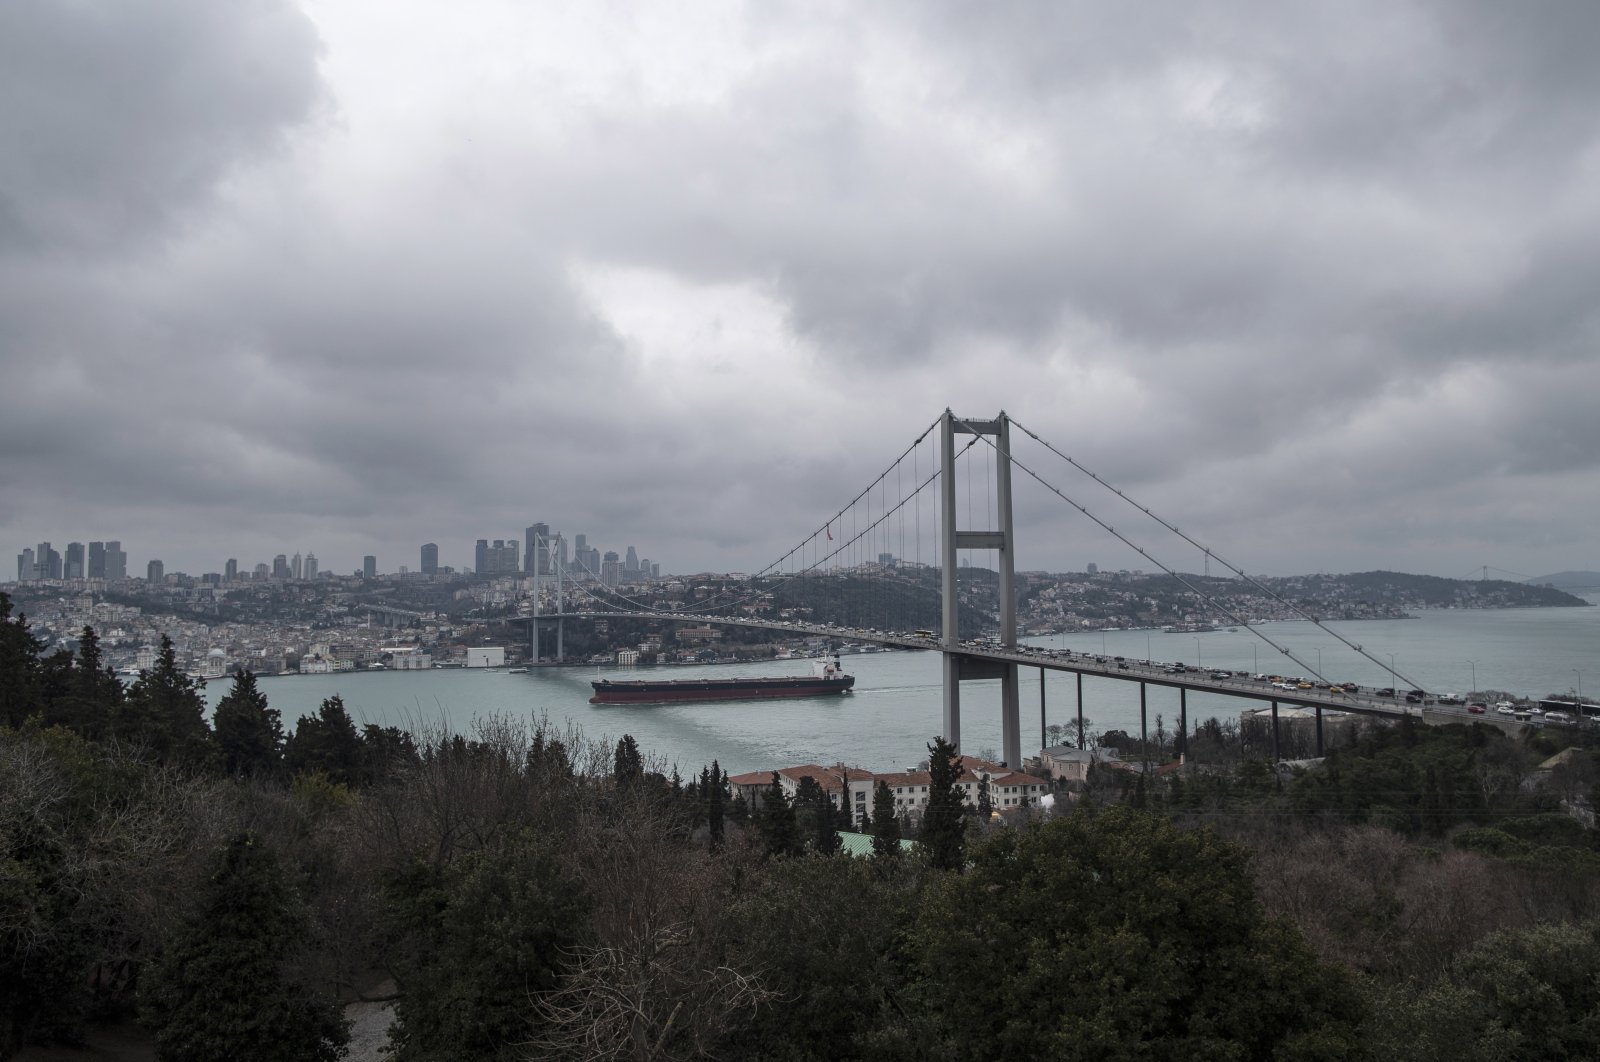 A cargo ship sails under the 15 July Martyrs Bridge on the Bosporus in Istanbul, Turkey, March 1, 2022. (EPA Photo)